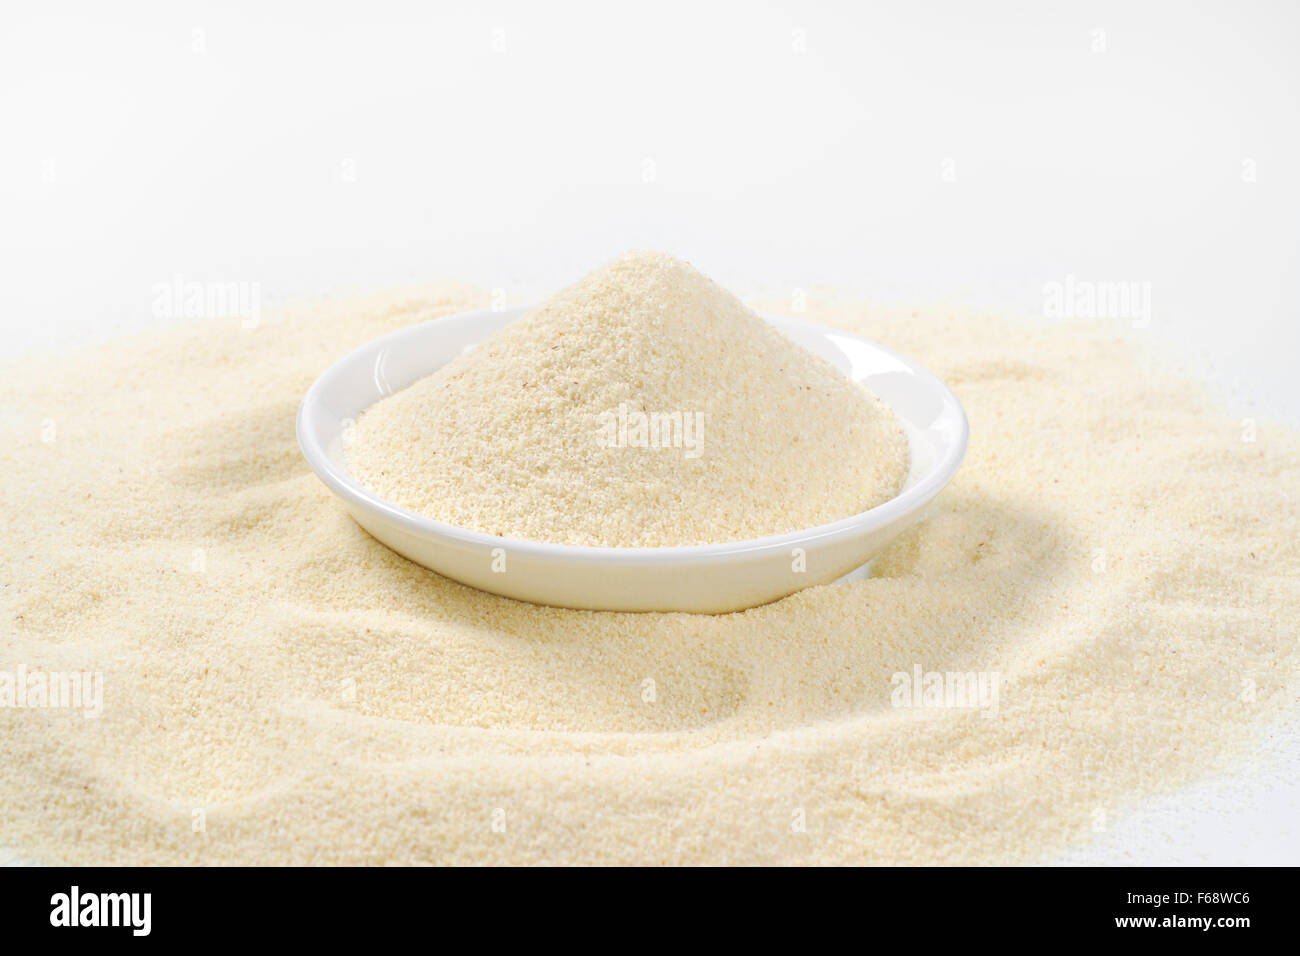 soup plate of grits on white background Stock Photo